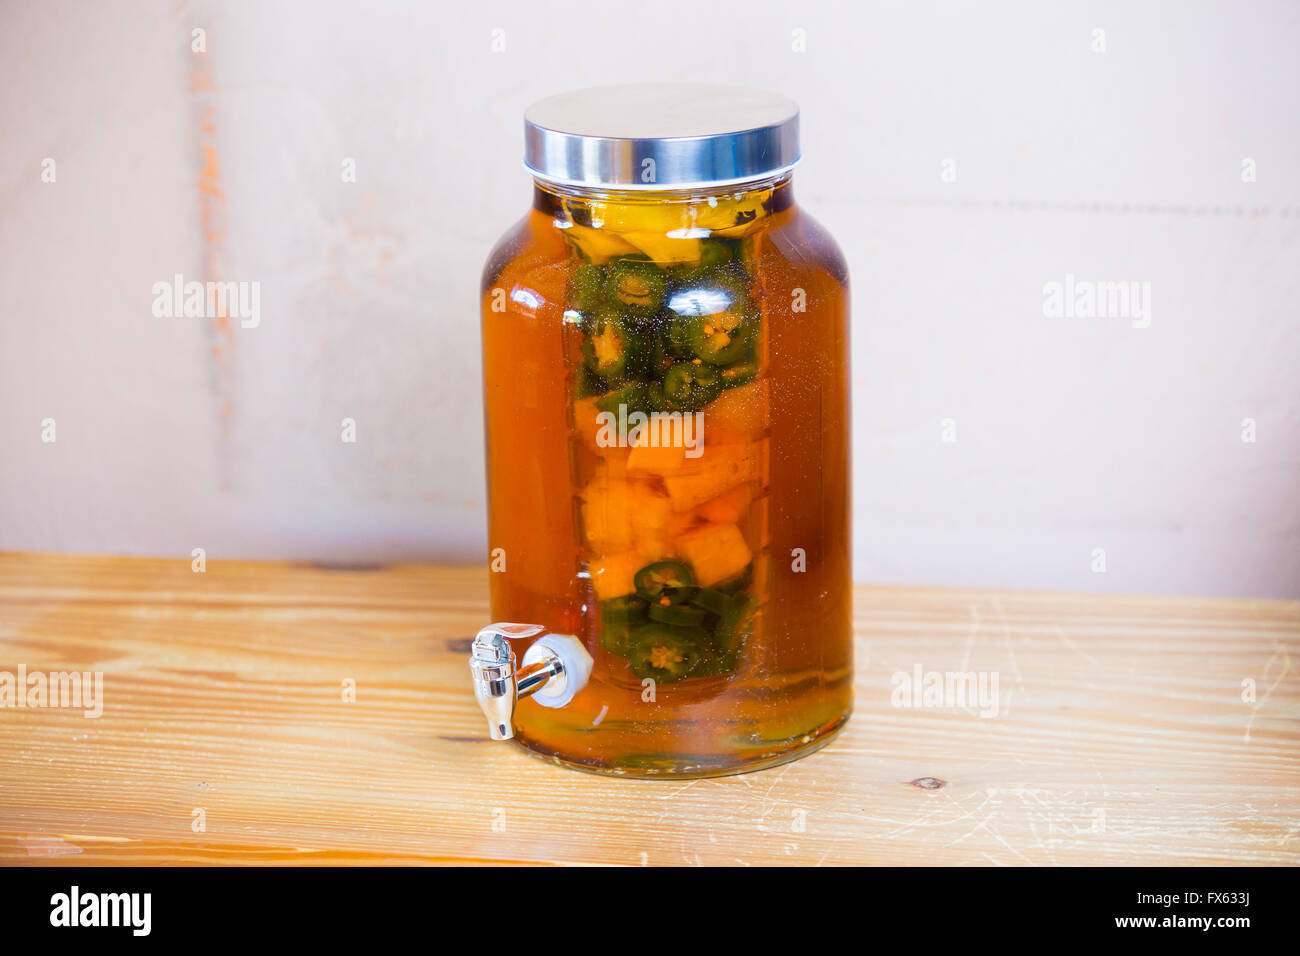 Tequila infused with jalapeno peppers in a tea jar at a restaurant bar. Stock Photo